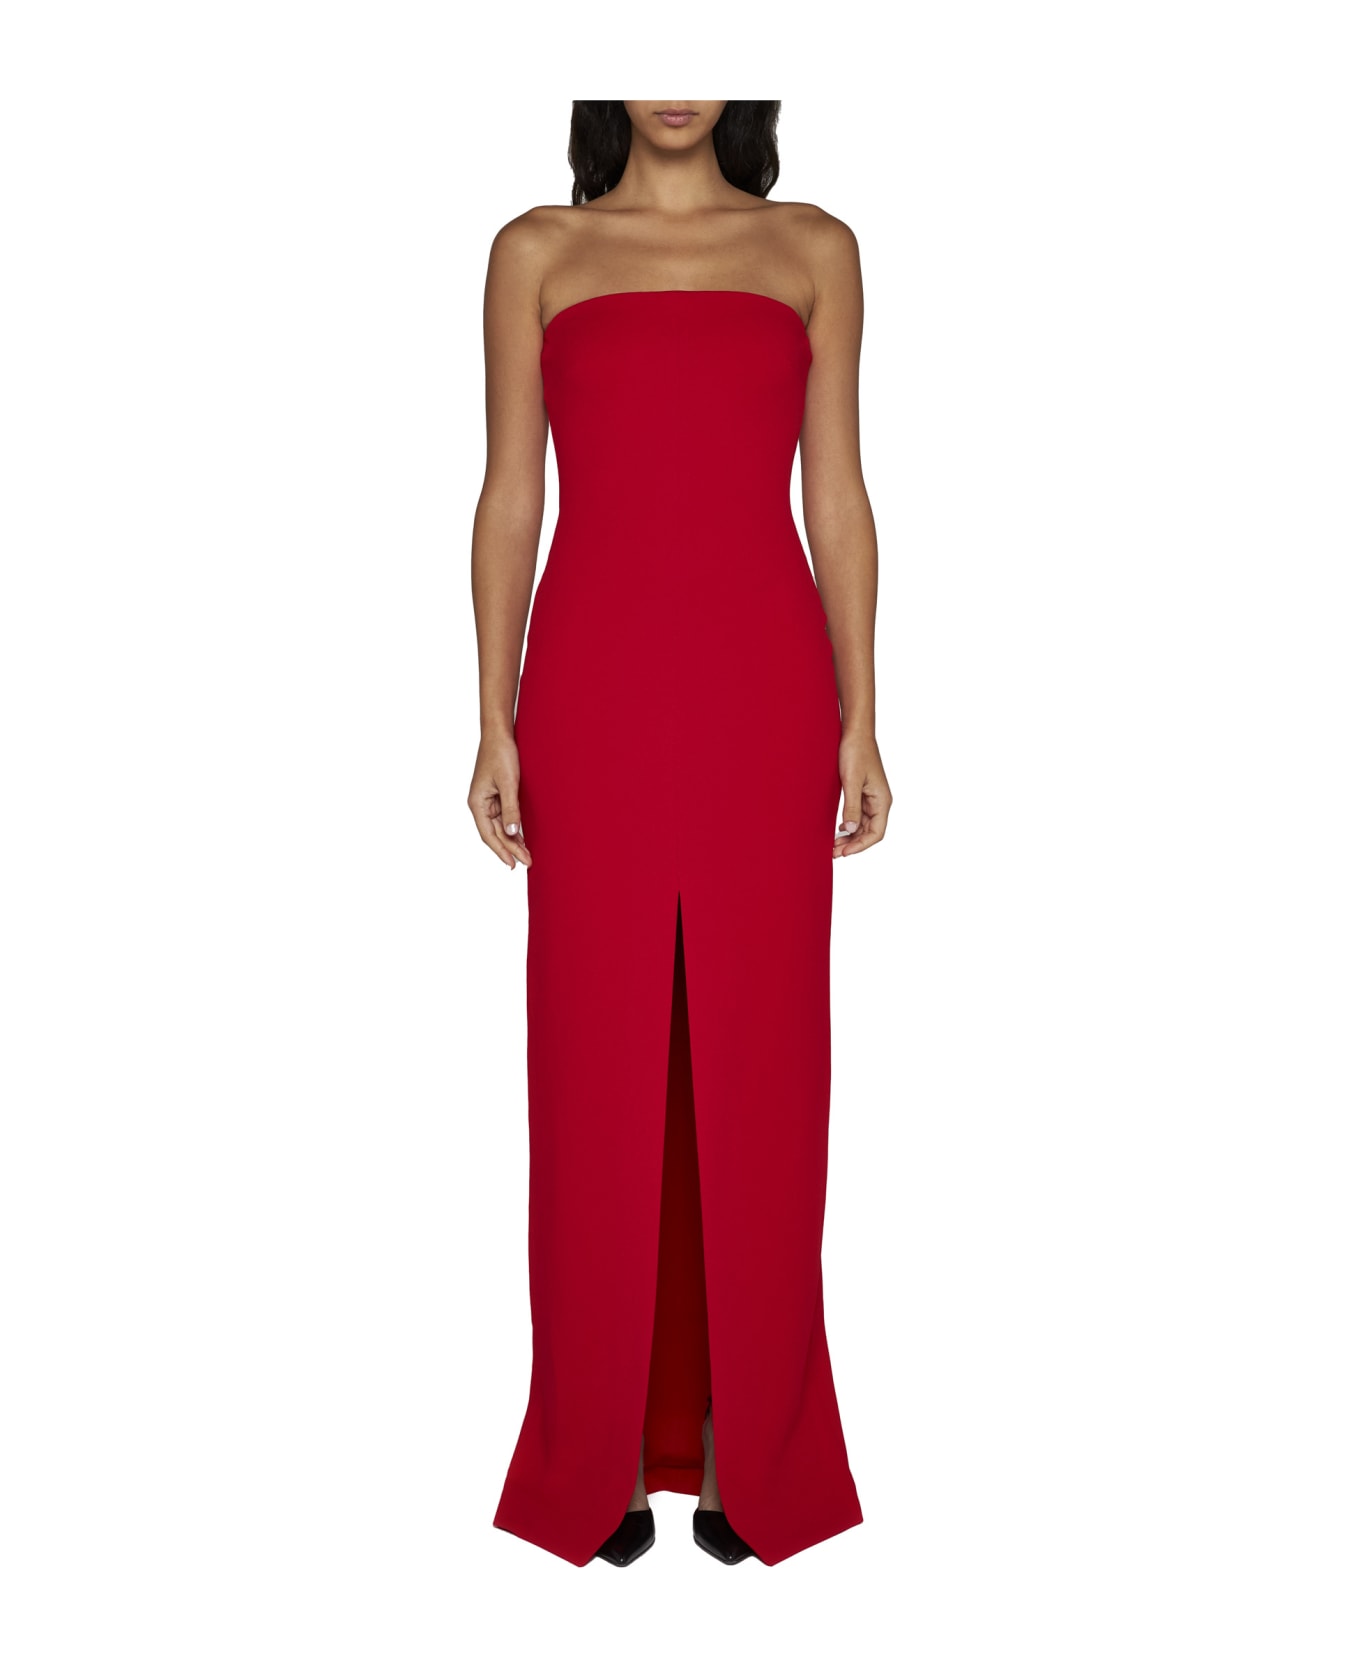 Solace London Dress - Red